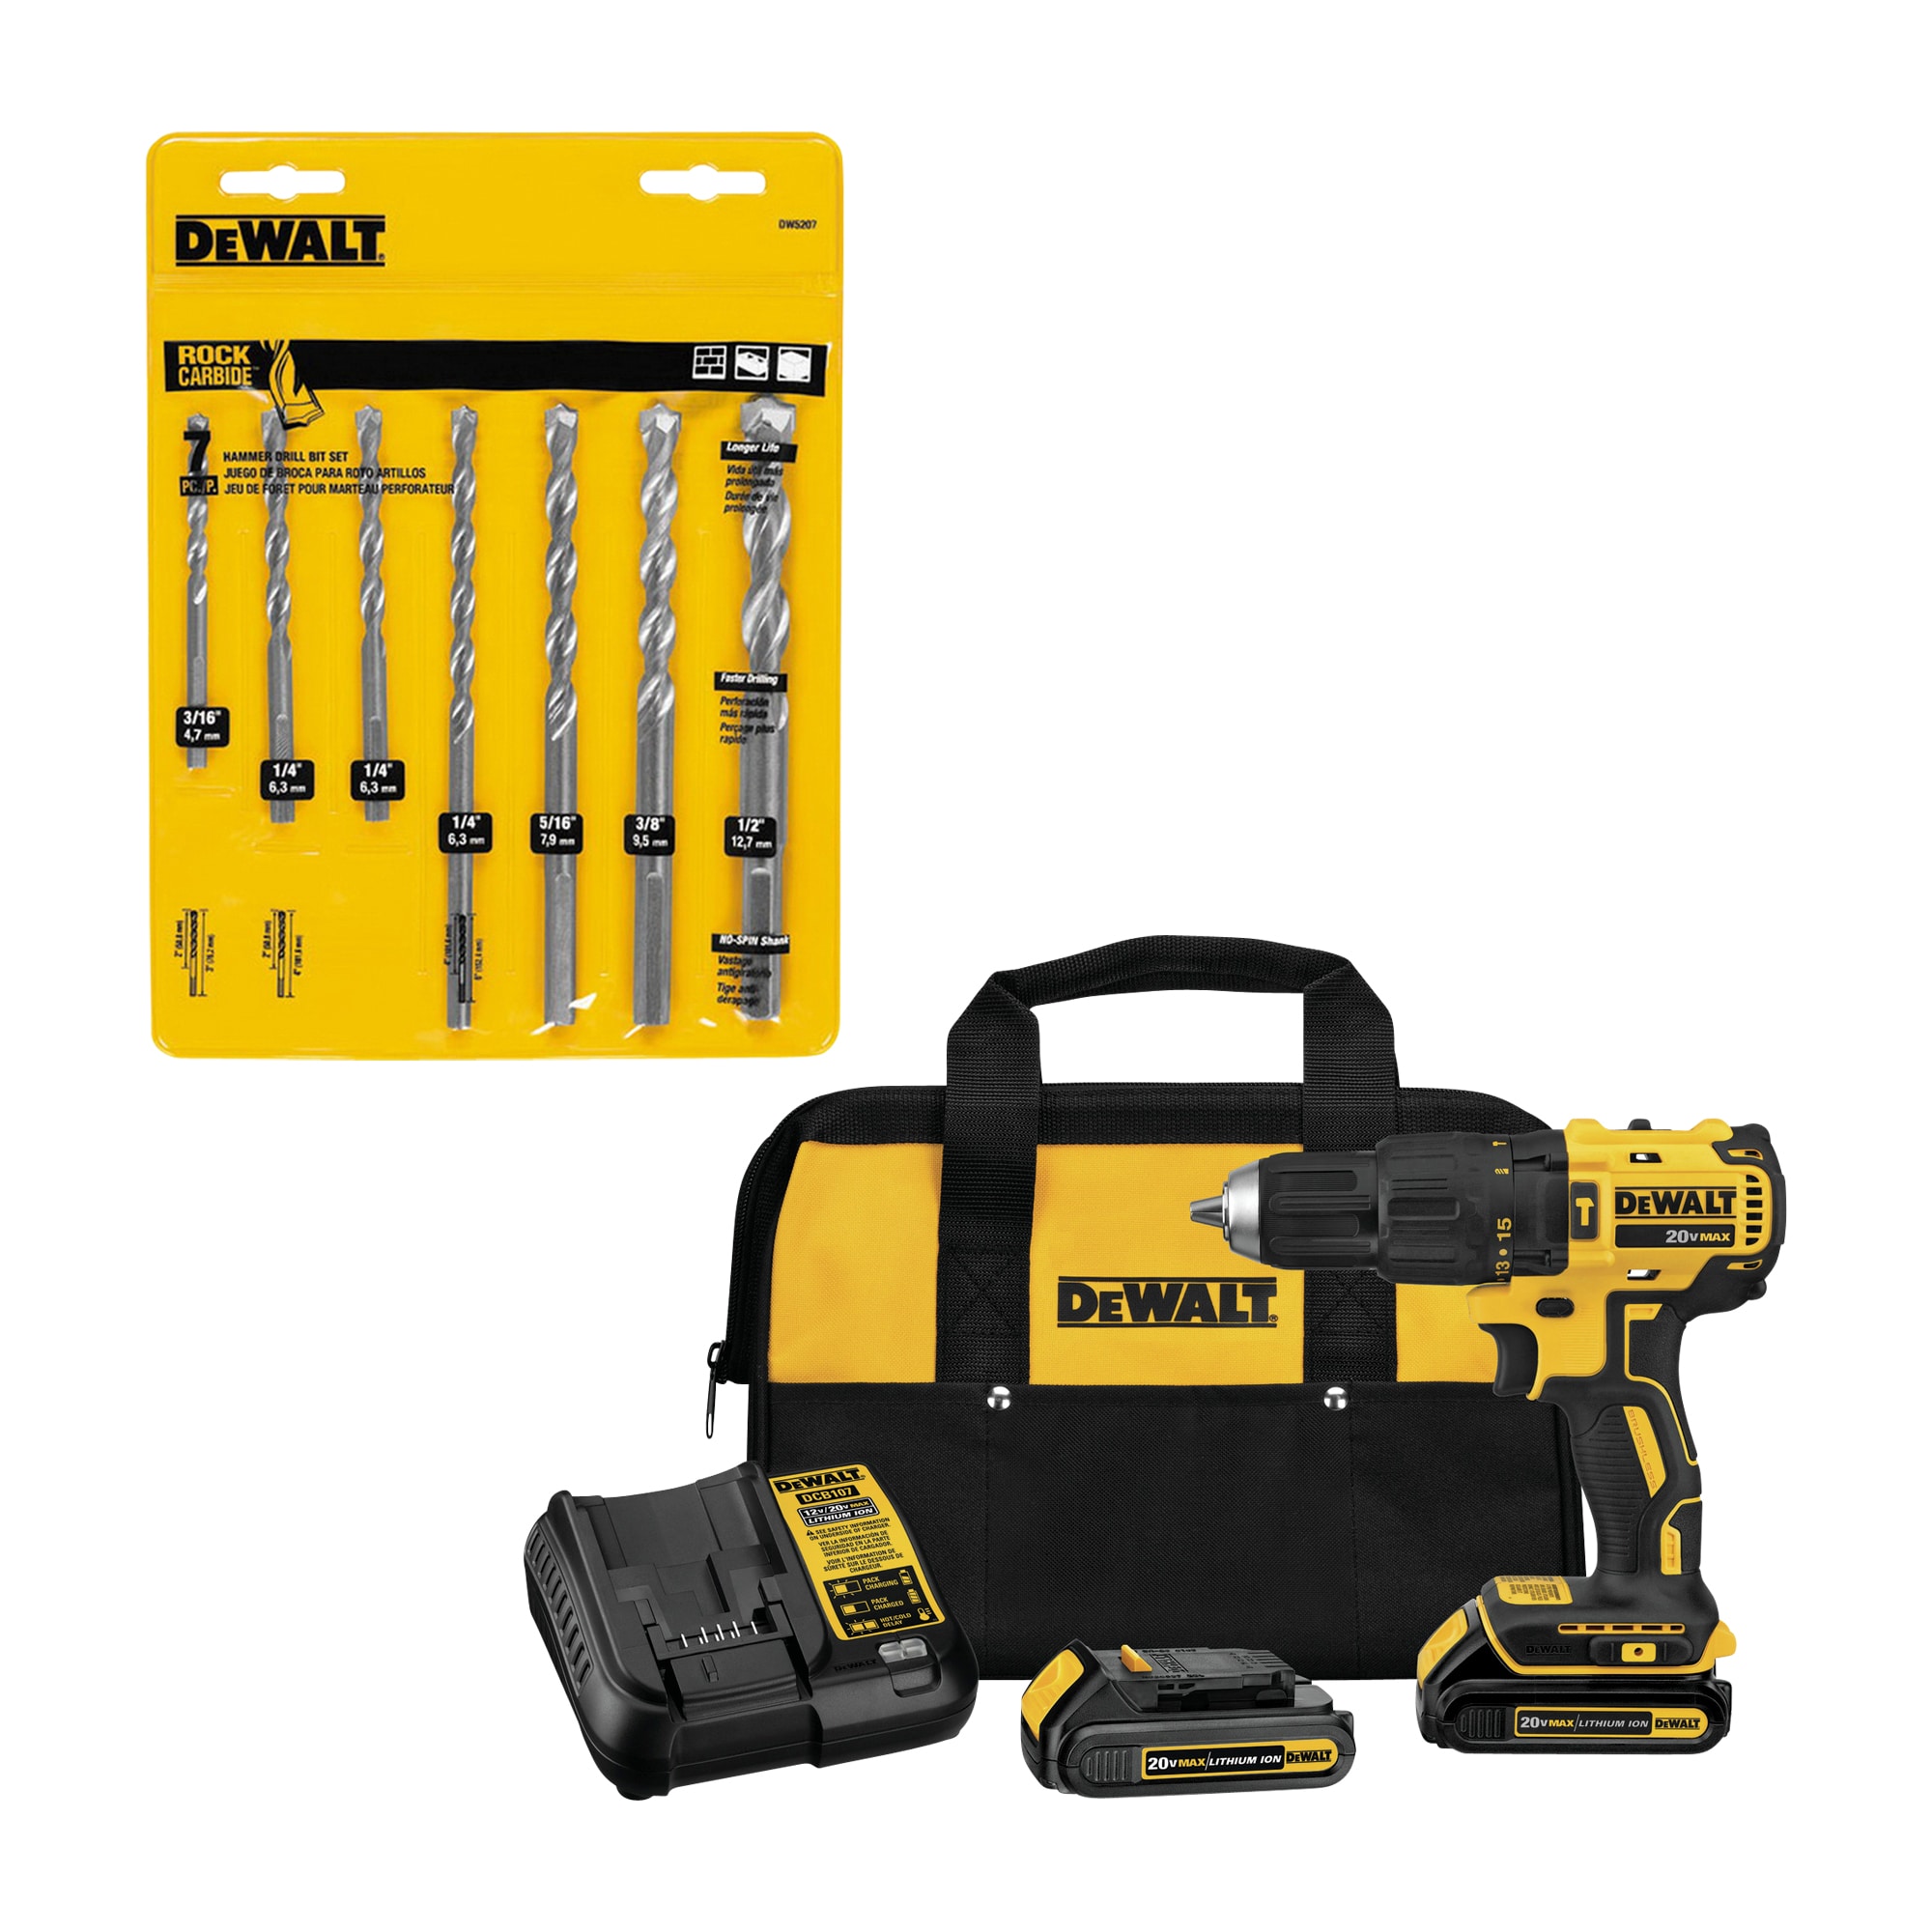 DEWALT 1/2-in 20-volt Max Variable Speed Brushless Cordless Hammer Drill (2-Batteries Included) & 7-Piece Set x Set Carbide Masonry Drill Bit Set for